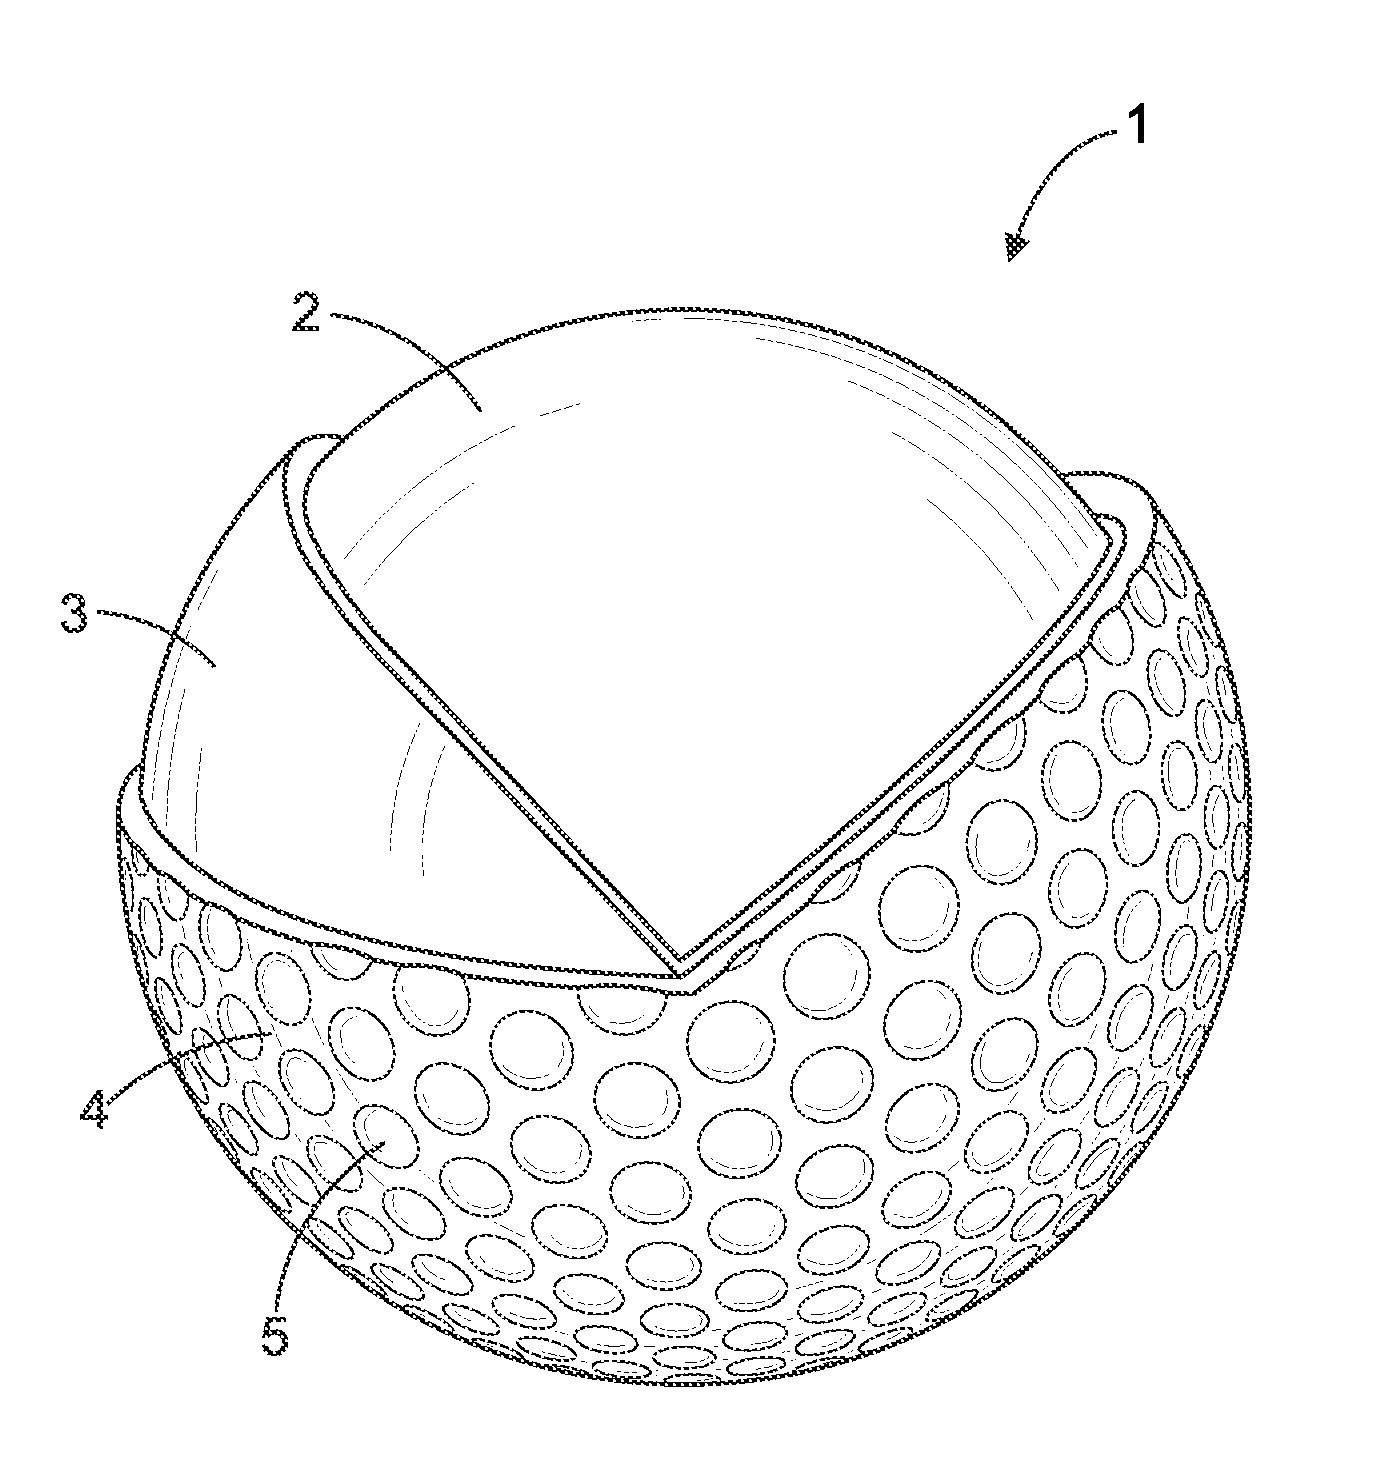 Golf ball and method of manufacturing a golf ball